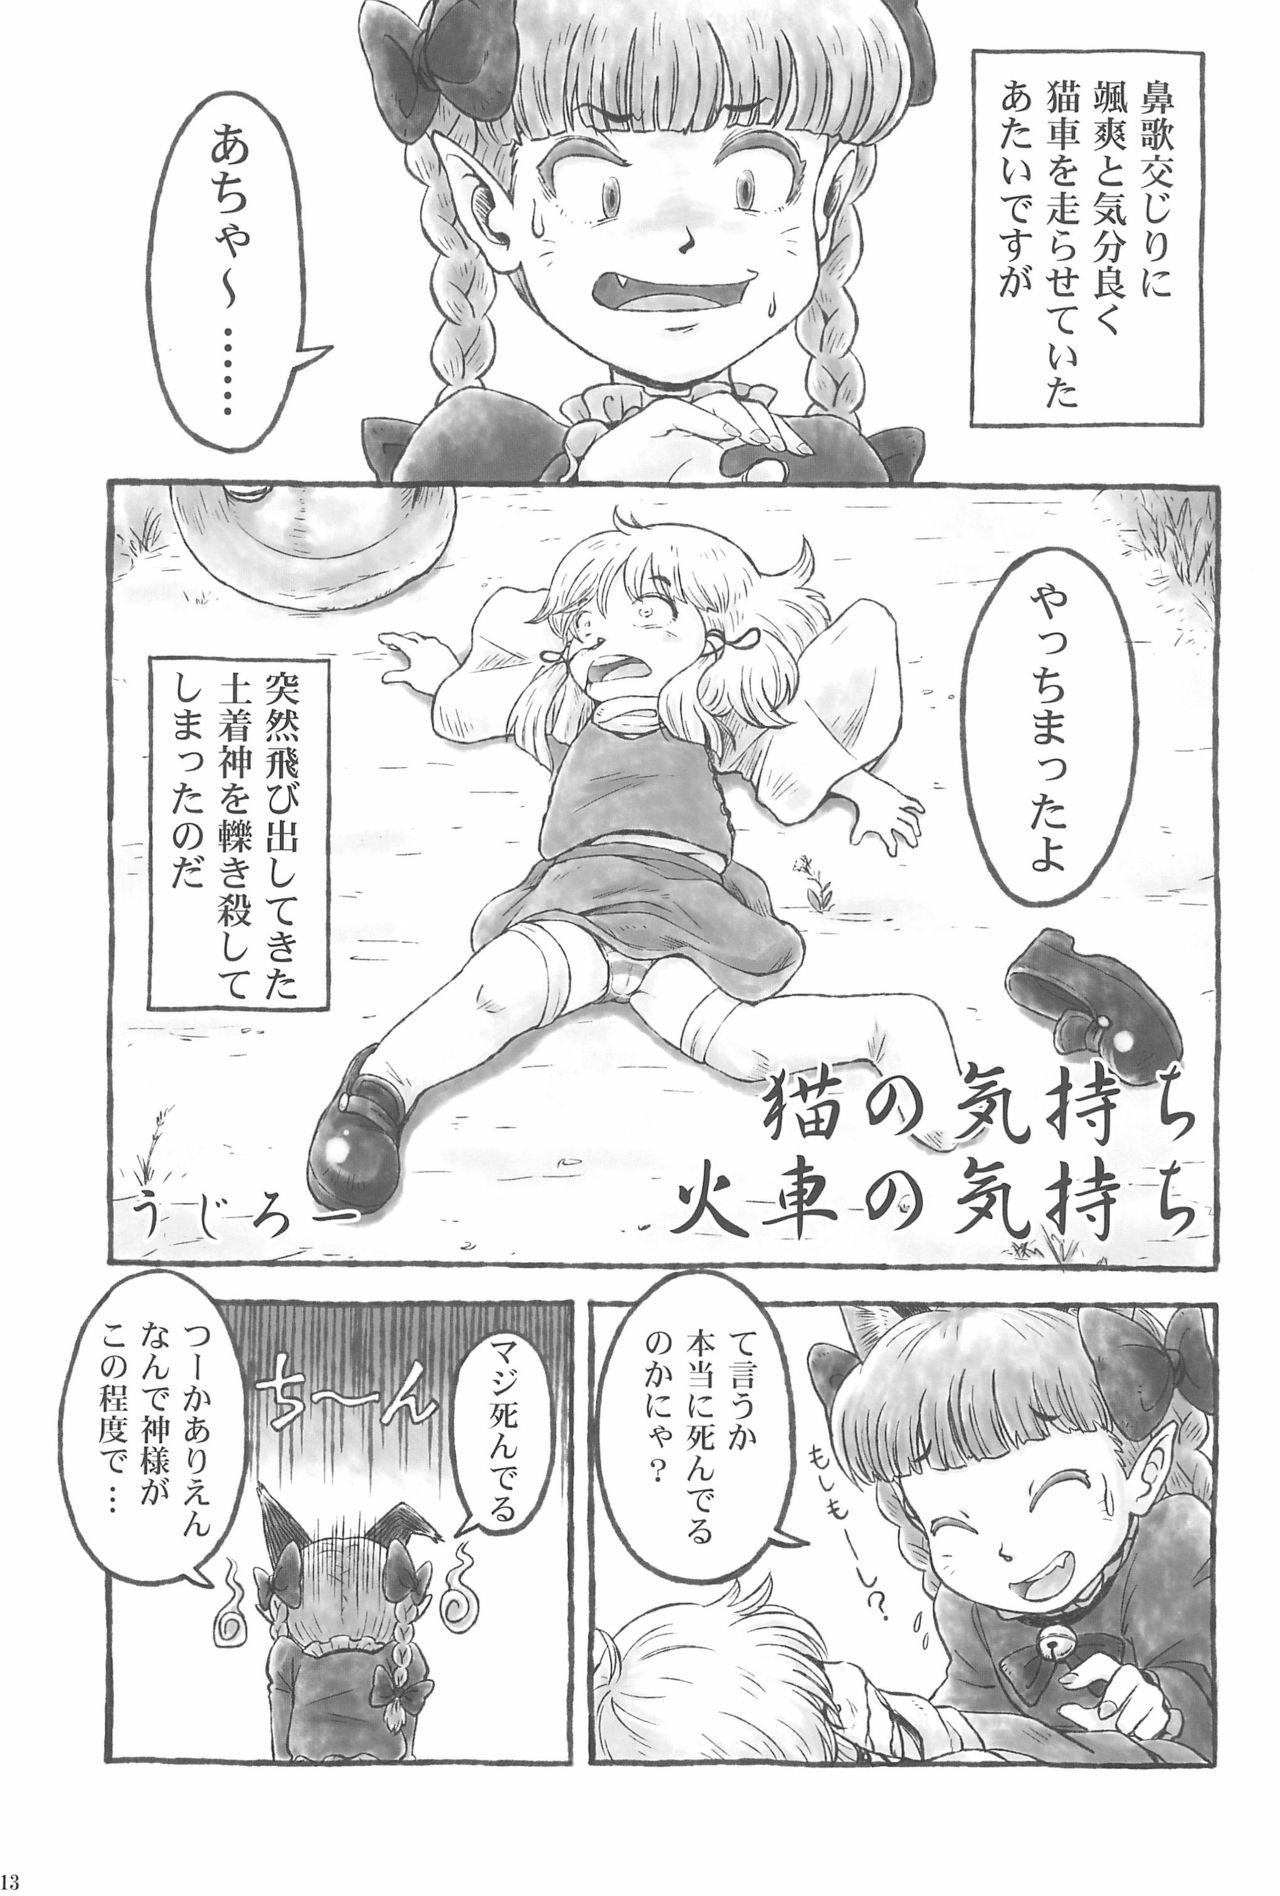 Touhou Roadkill Joint Publication 12